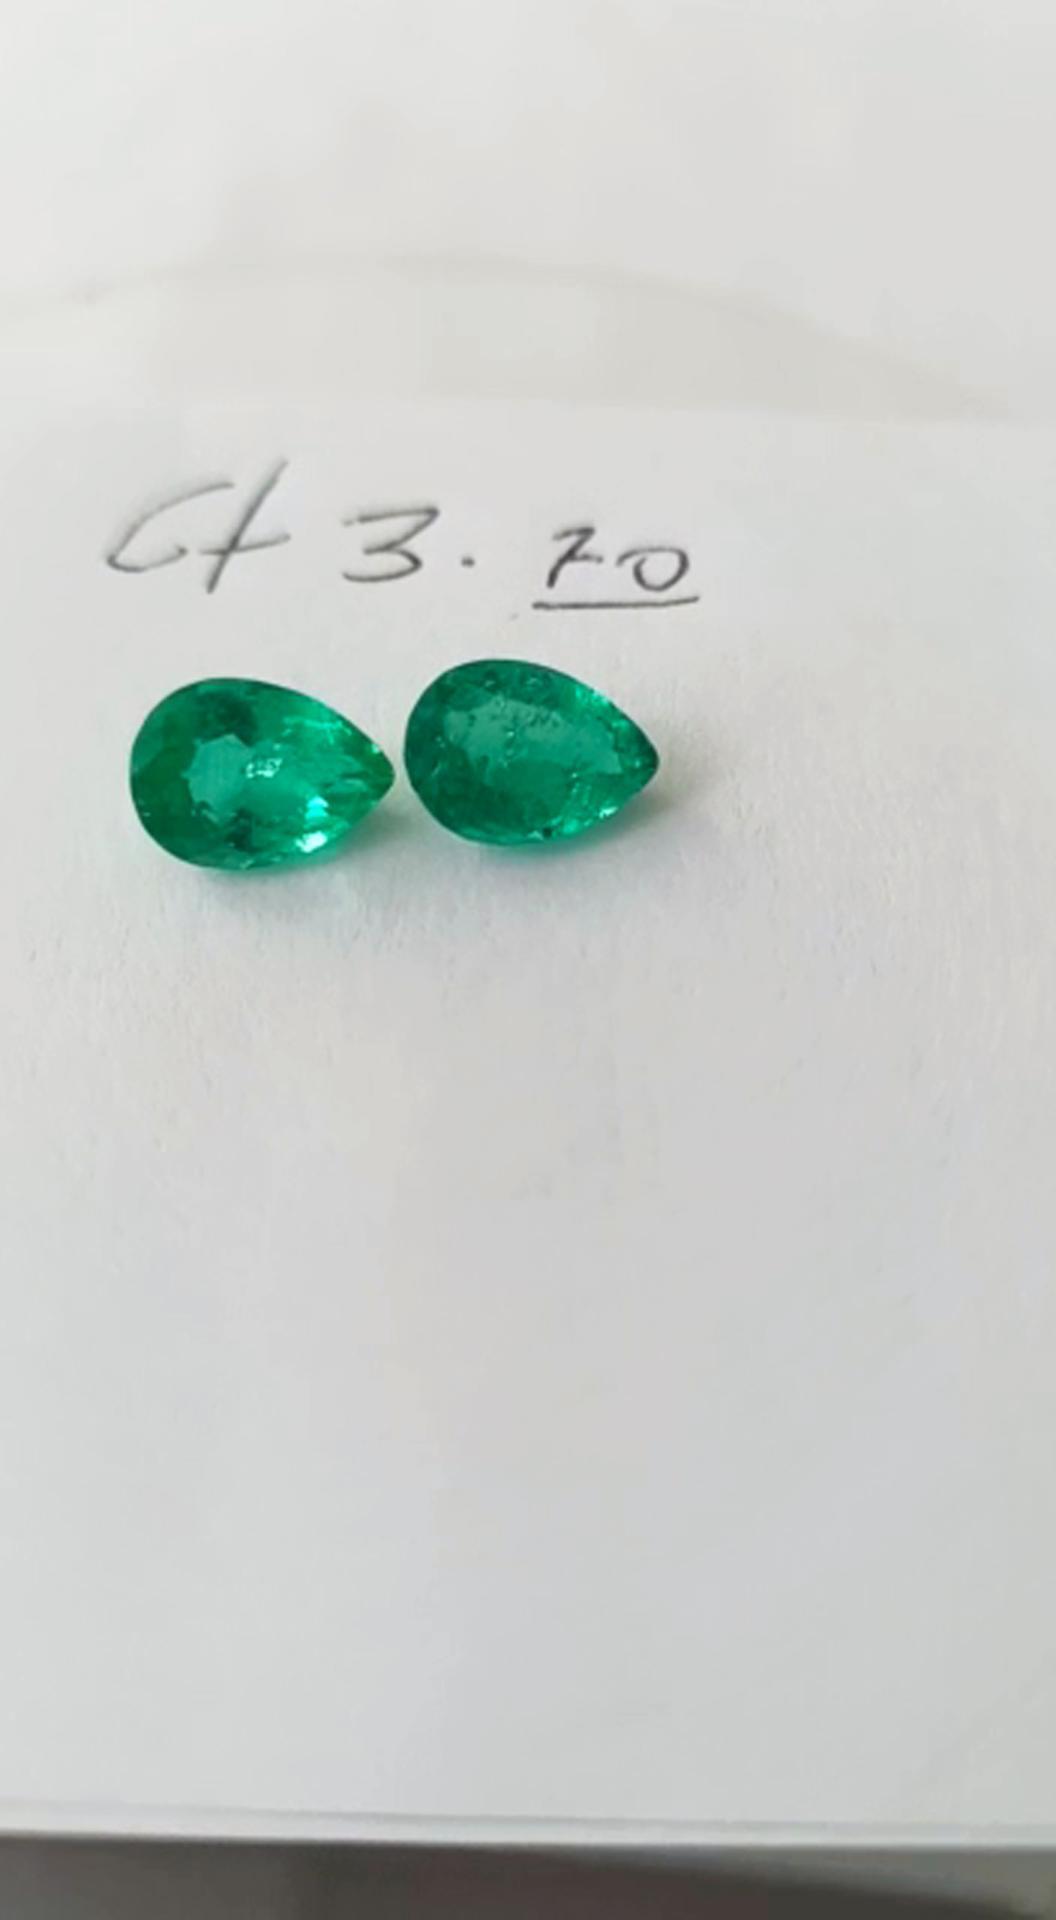 3.70 Ct. Colombian Emerald Pair